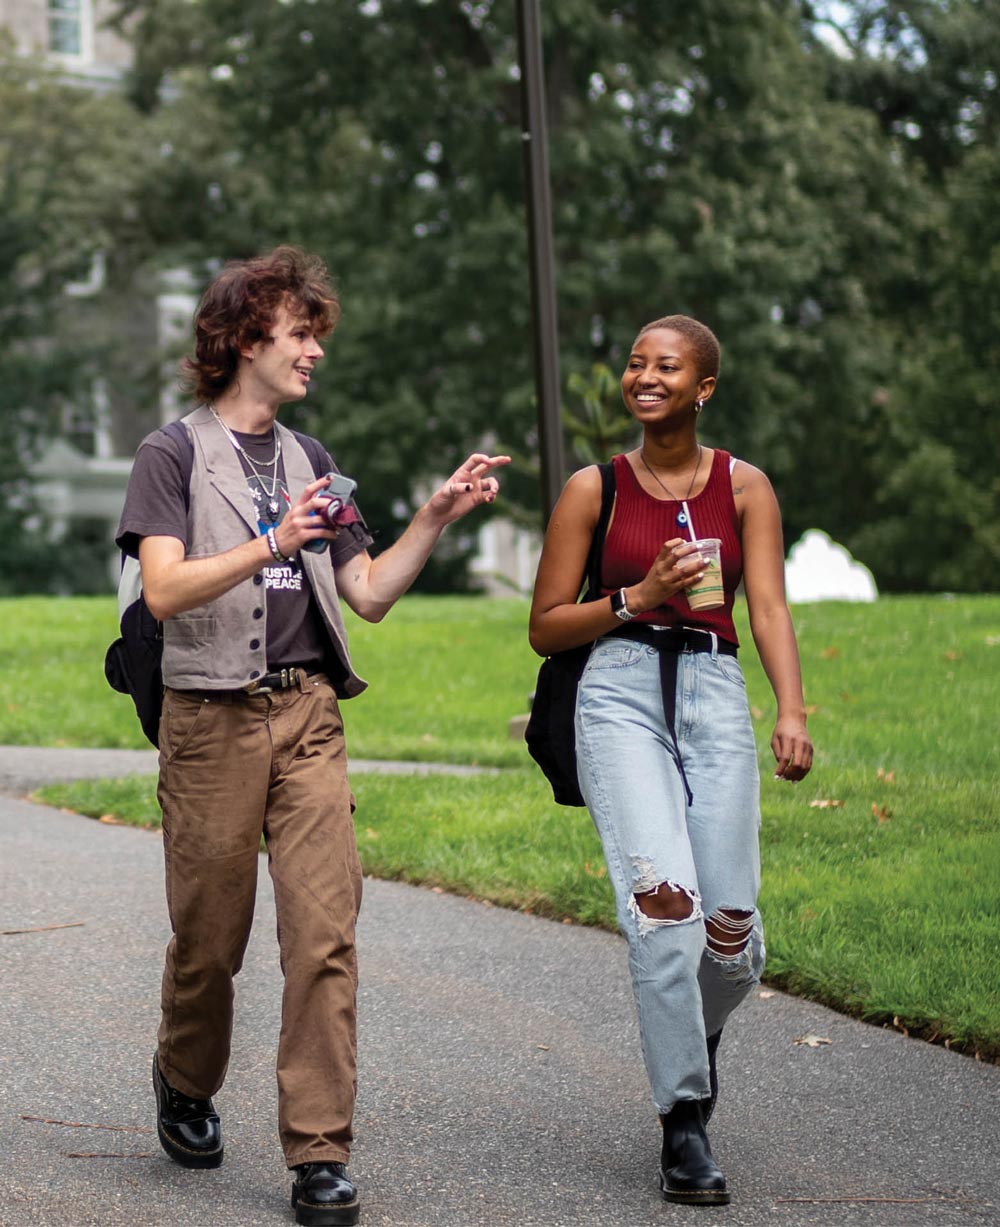 two Swarthmore students walking together